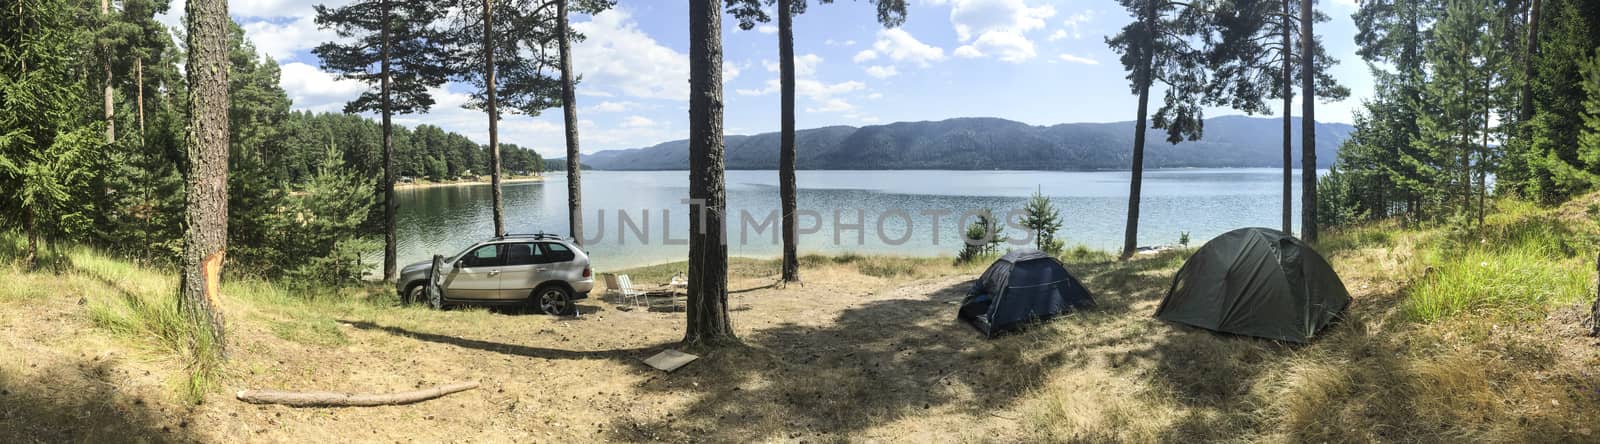 Panoramic image of forest and mountain lake. Tents and car in th by deyan_georgiev